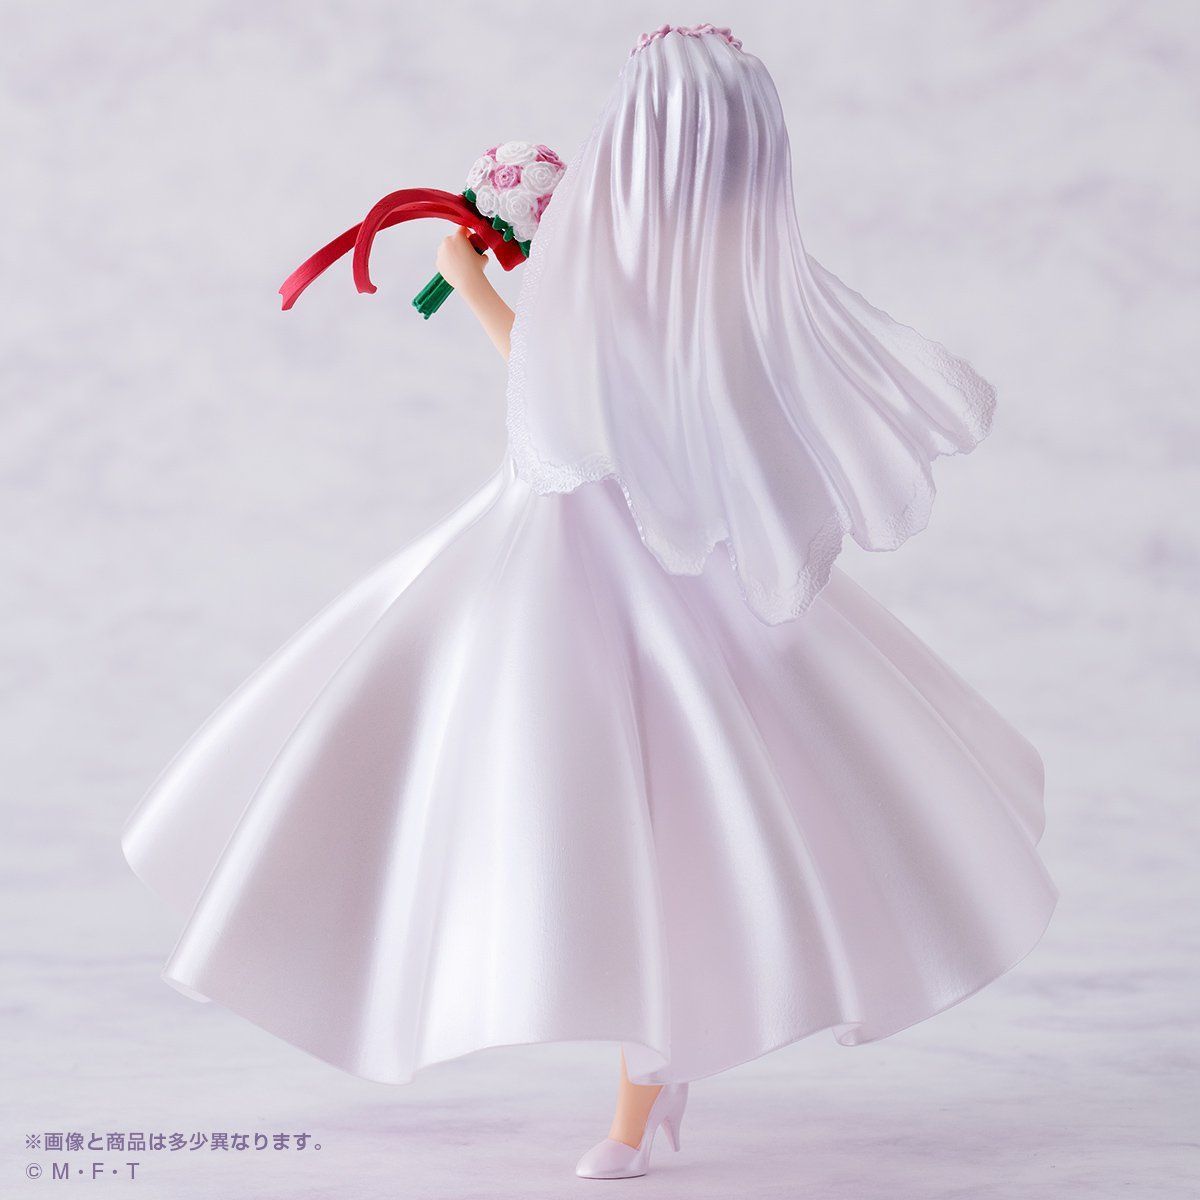 New [GeGeGe no Kitaro] erotic figure to undress even clothes in the erotic wedding dress of the cat daughter! 6